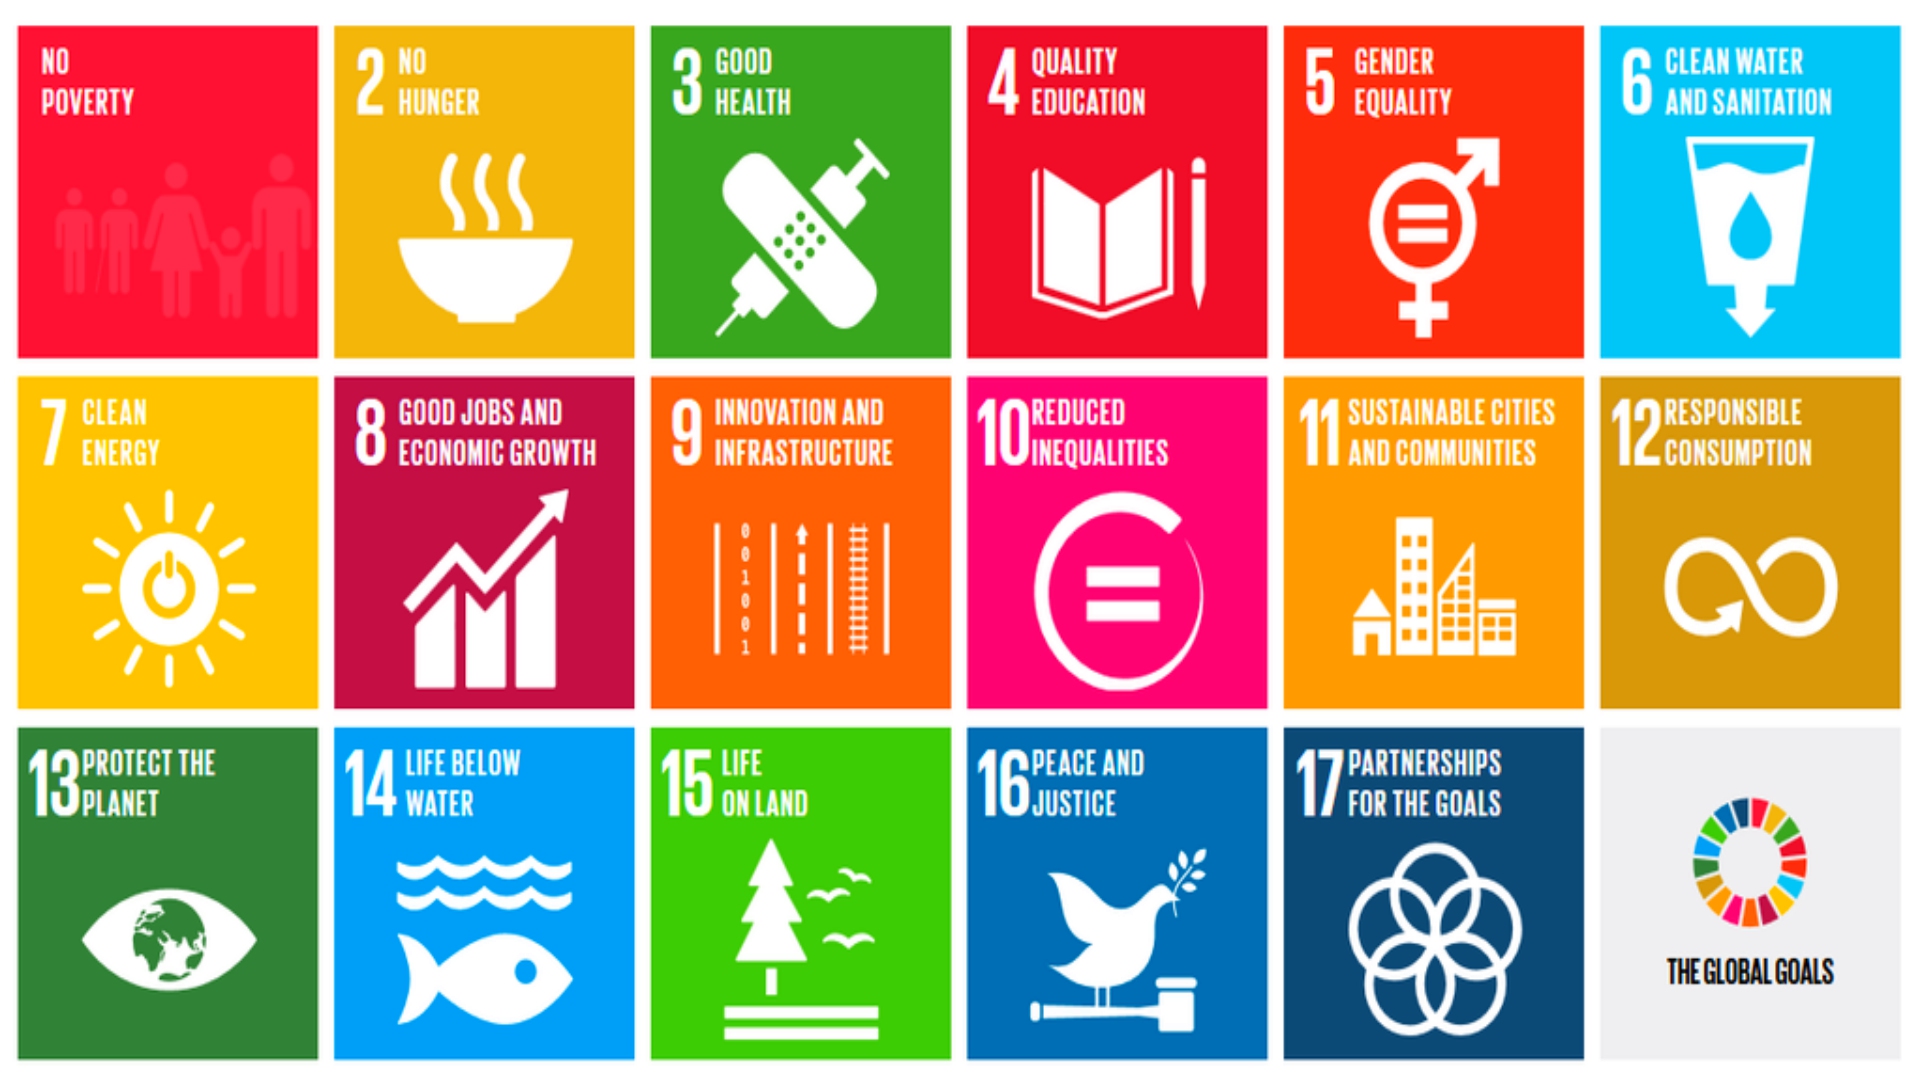 high-quality-data-crucial-for-success-of-sustainable-development-goals